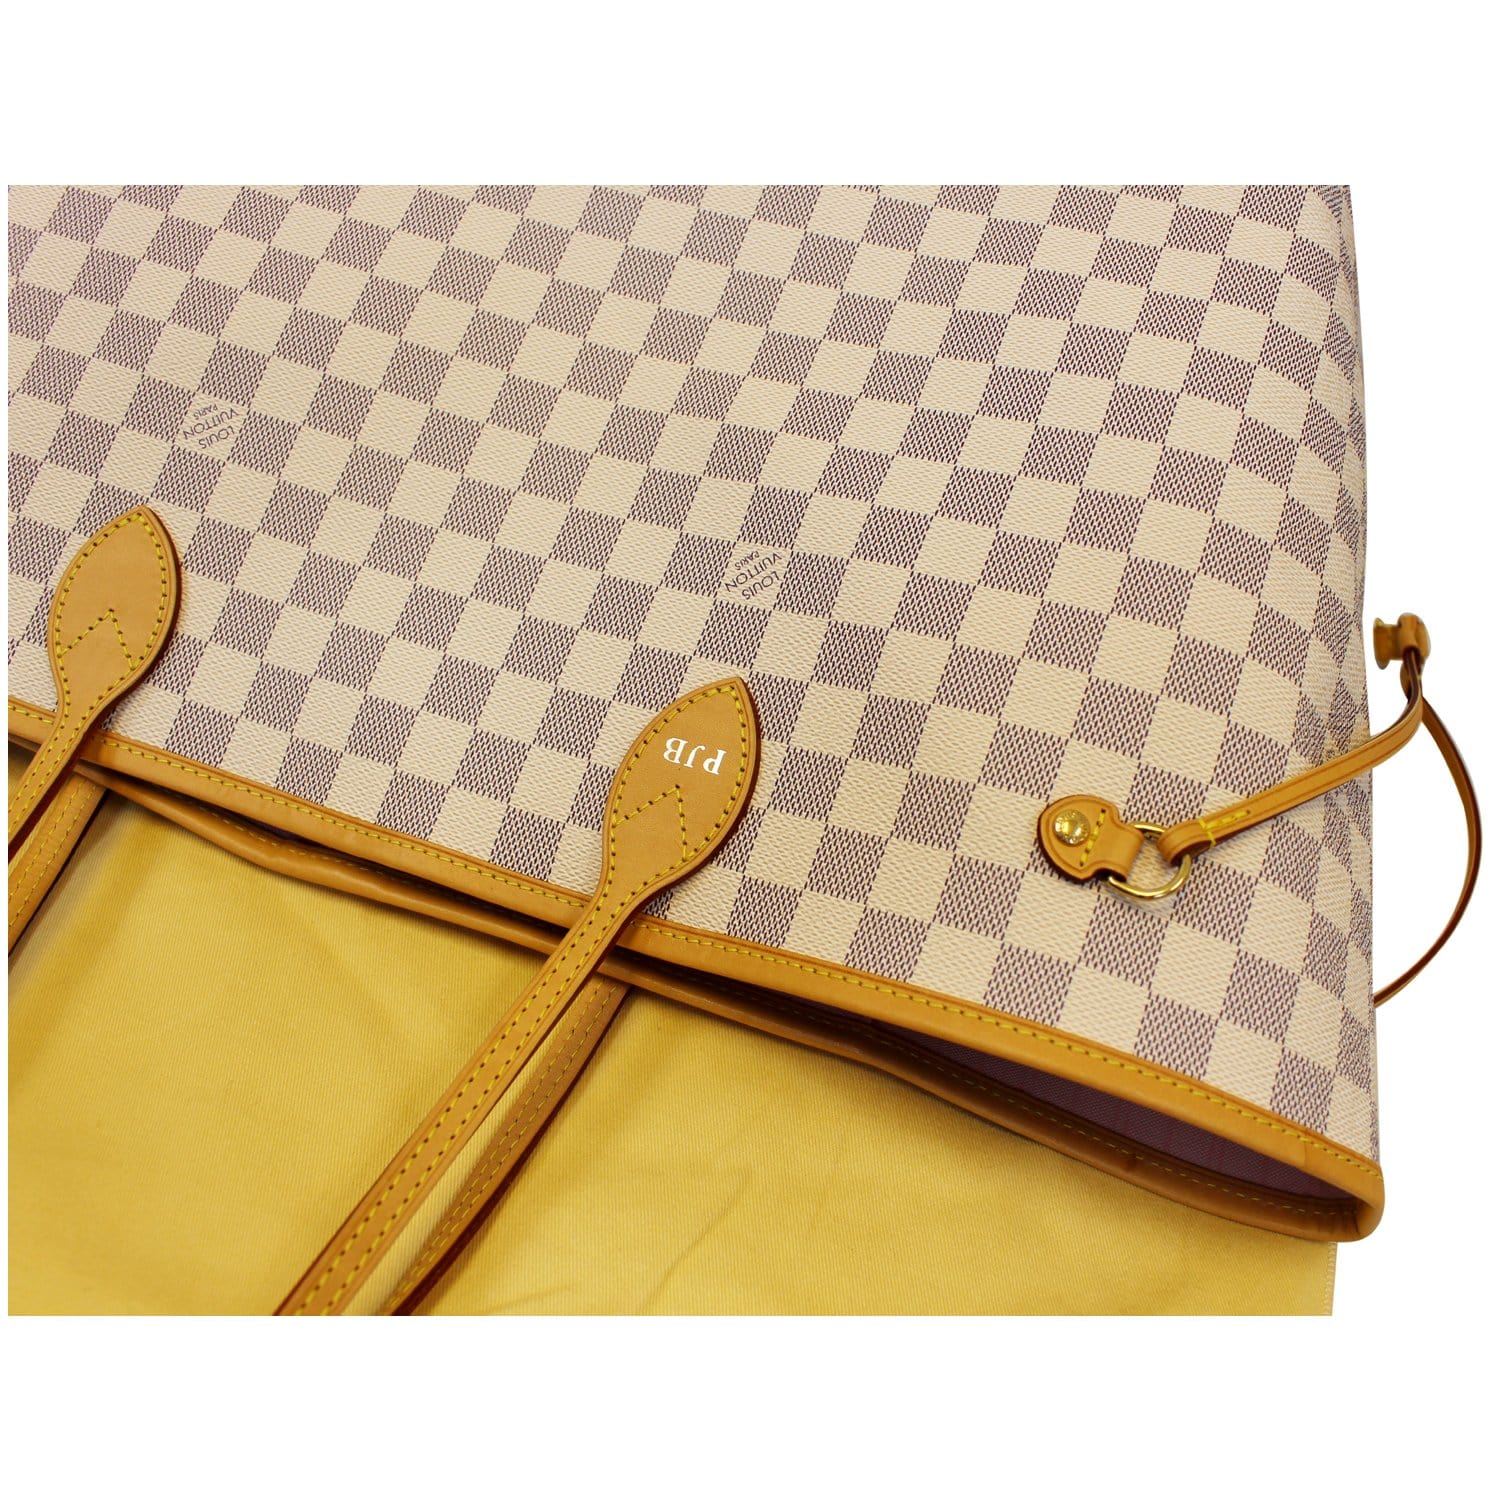 Louis Vuitton Neverfull GM in Damier Azur GM with Rose Ballerine Lining -  SOLD